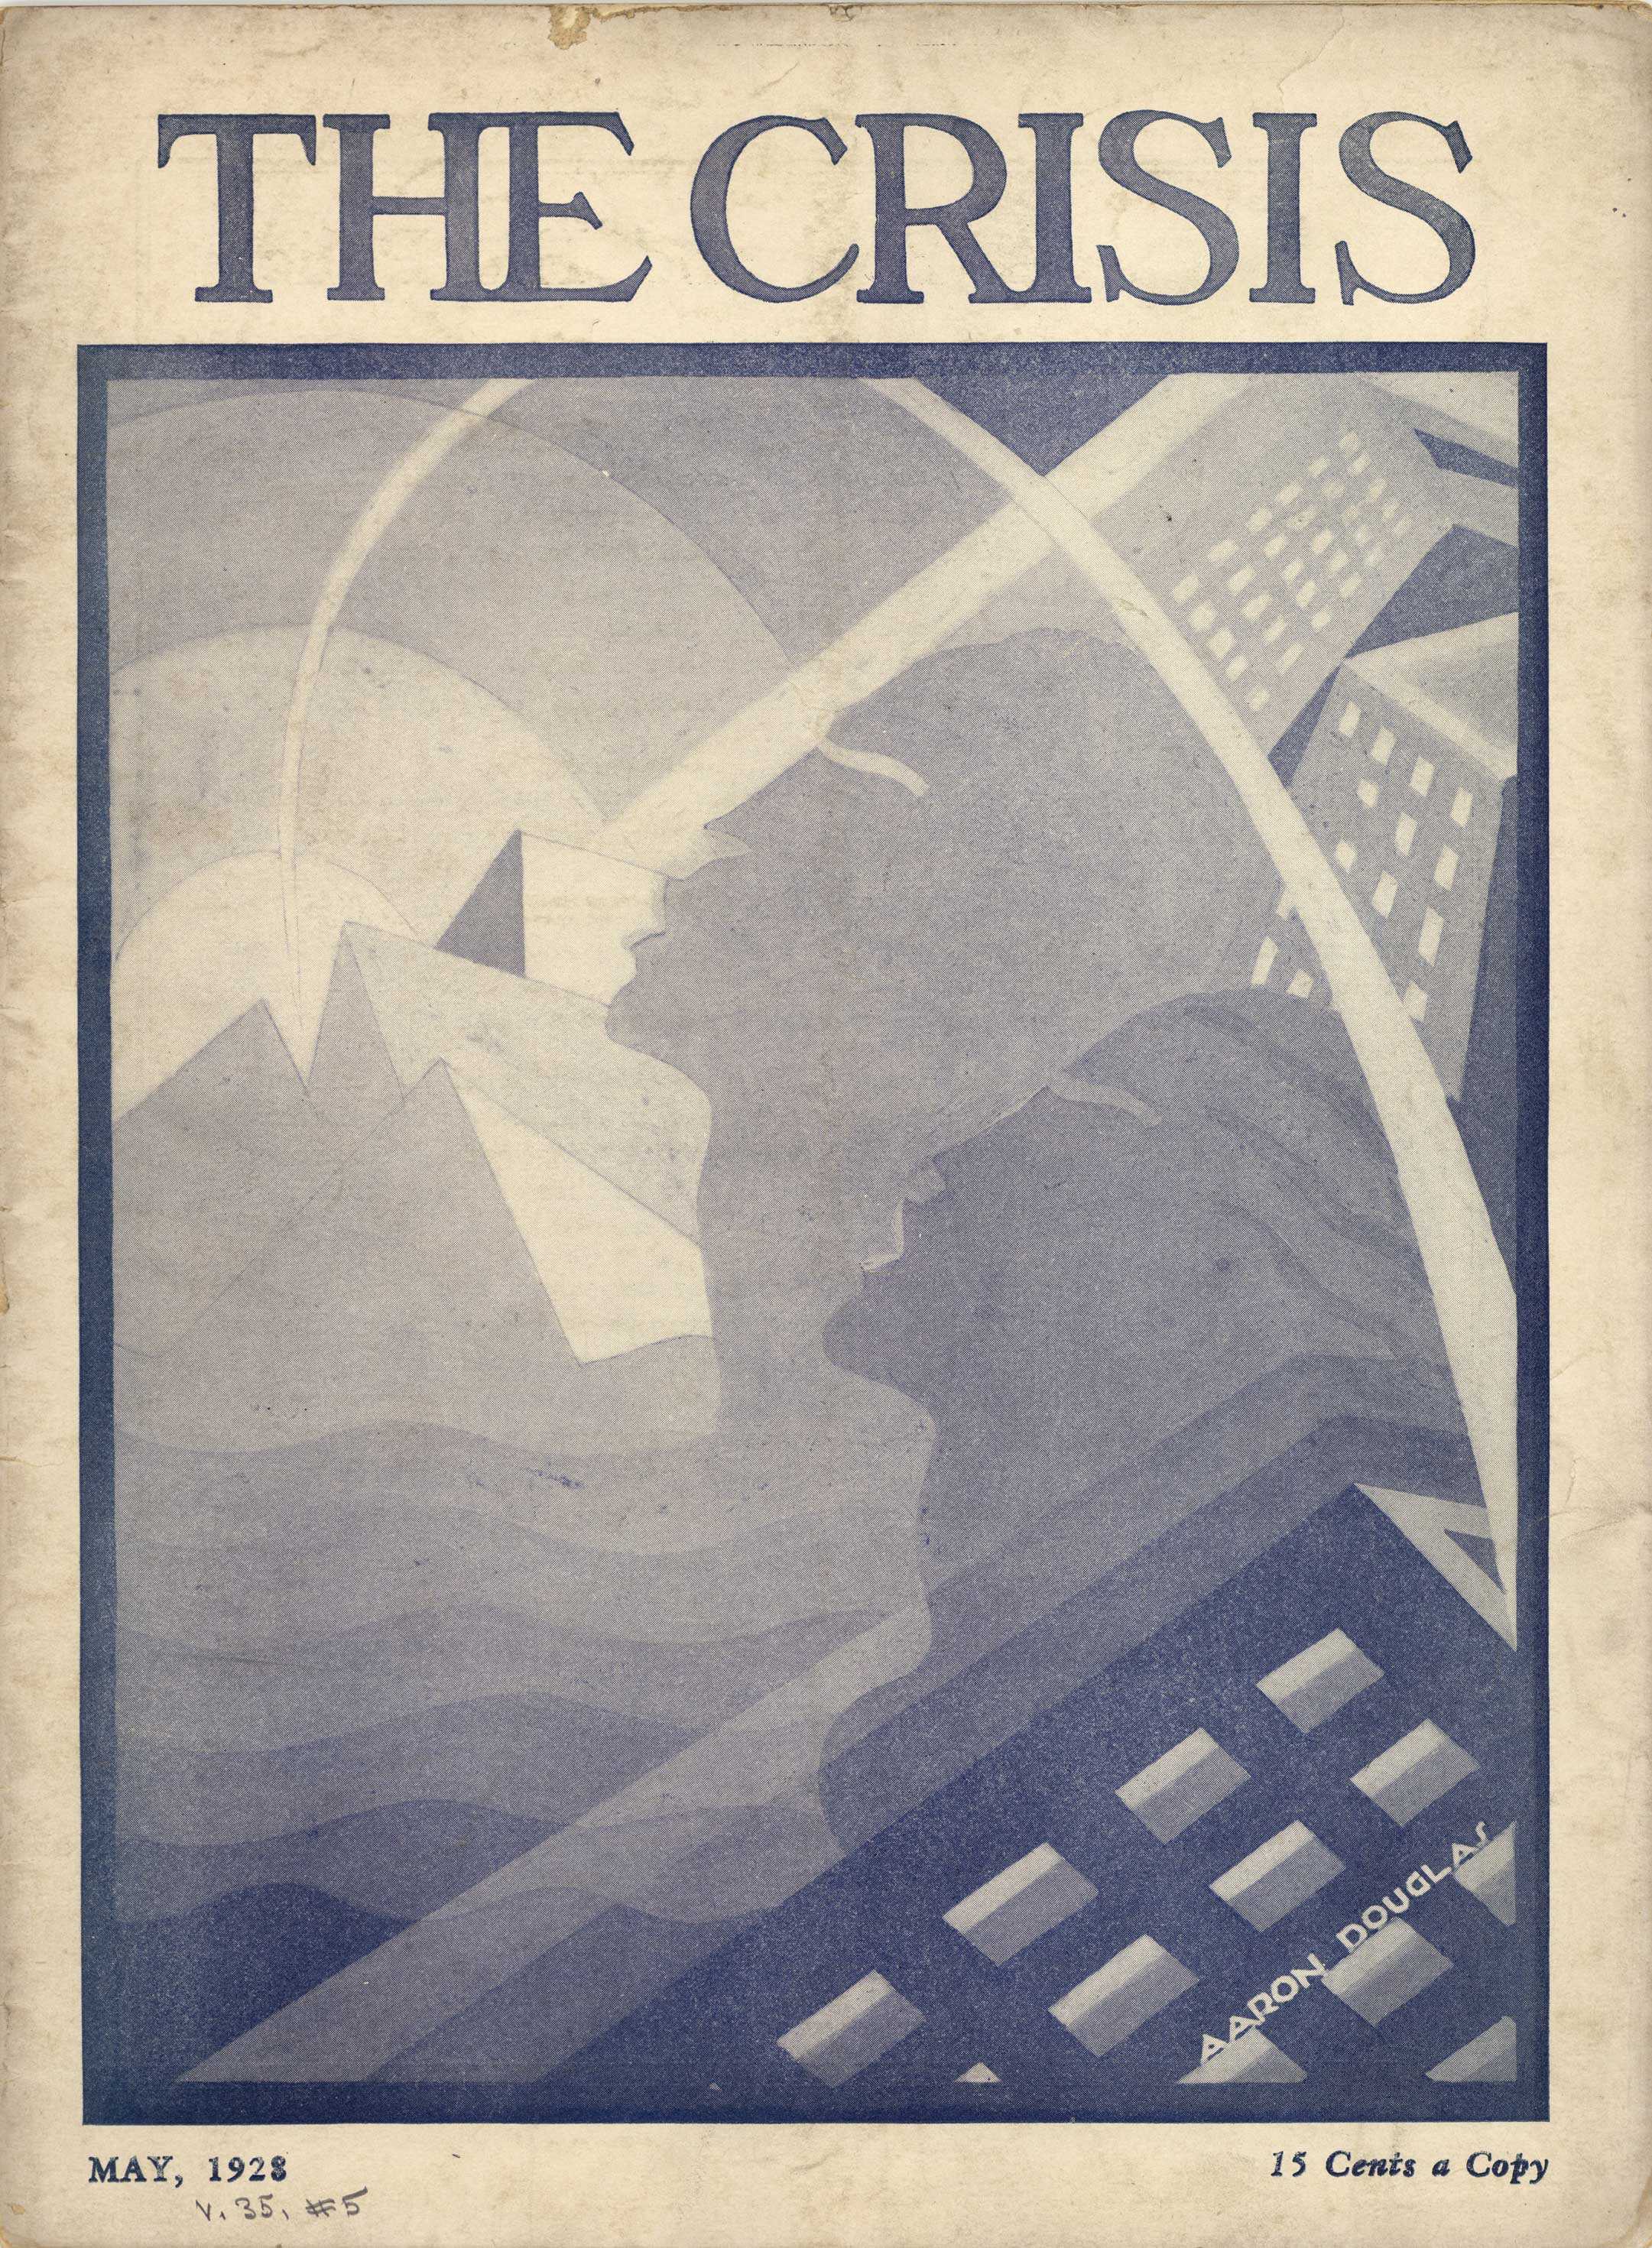 The cover of the Crisis in September 1927 is of graphic people overlay a skyline and other landscapes in a faded blue tone.